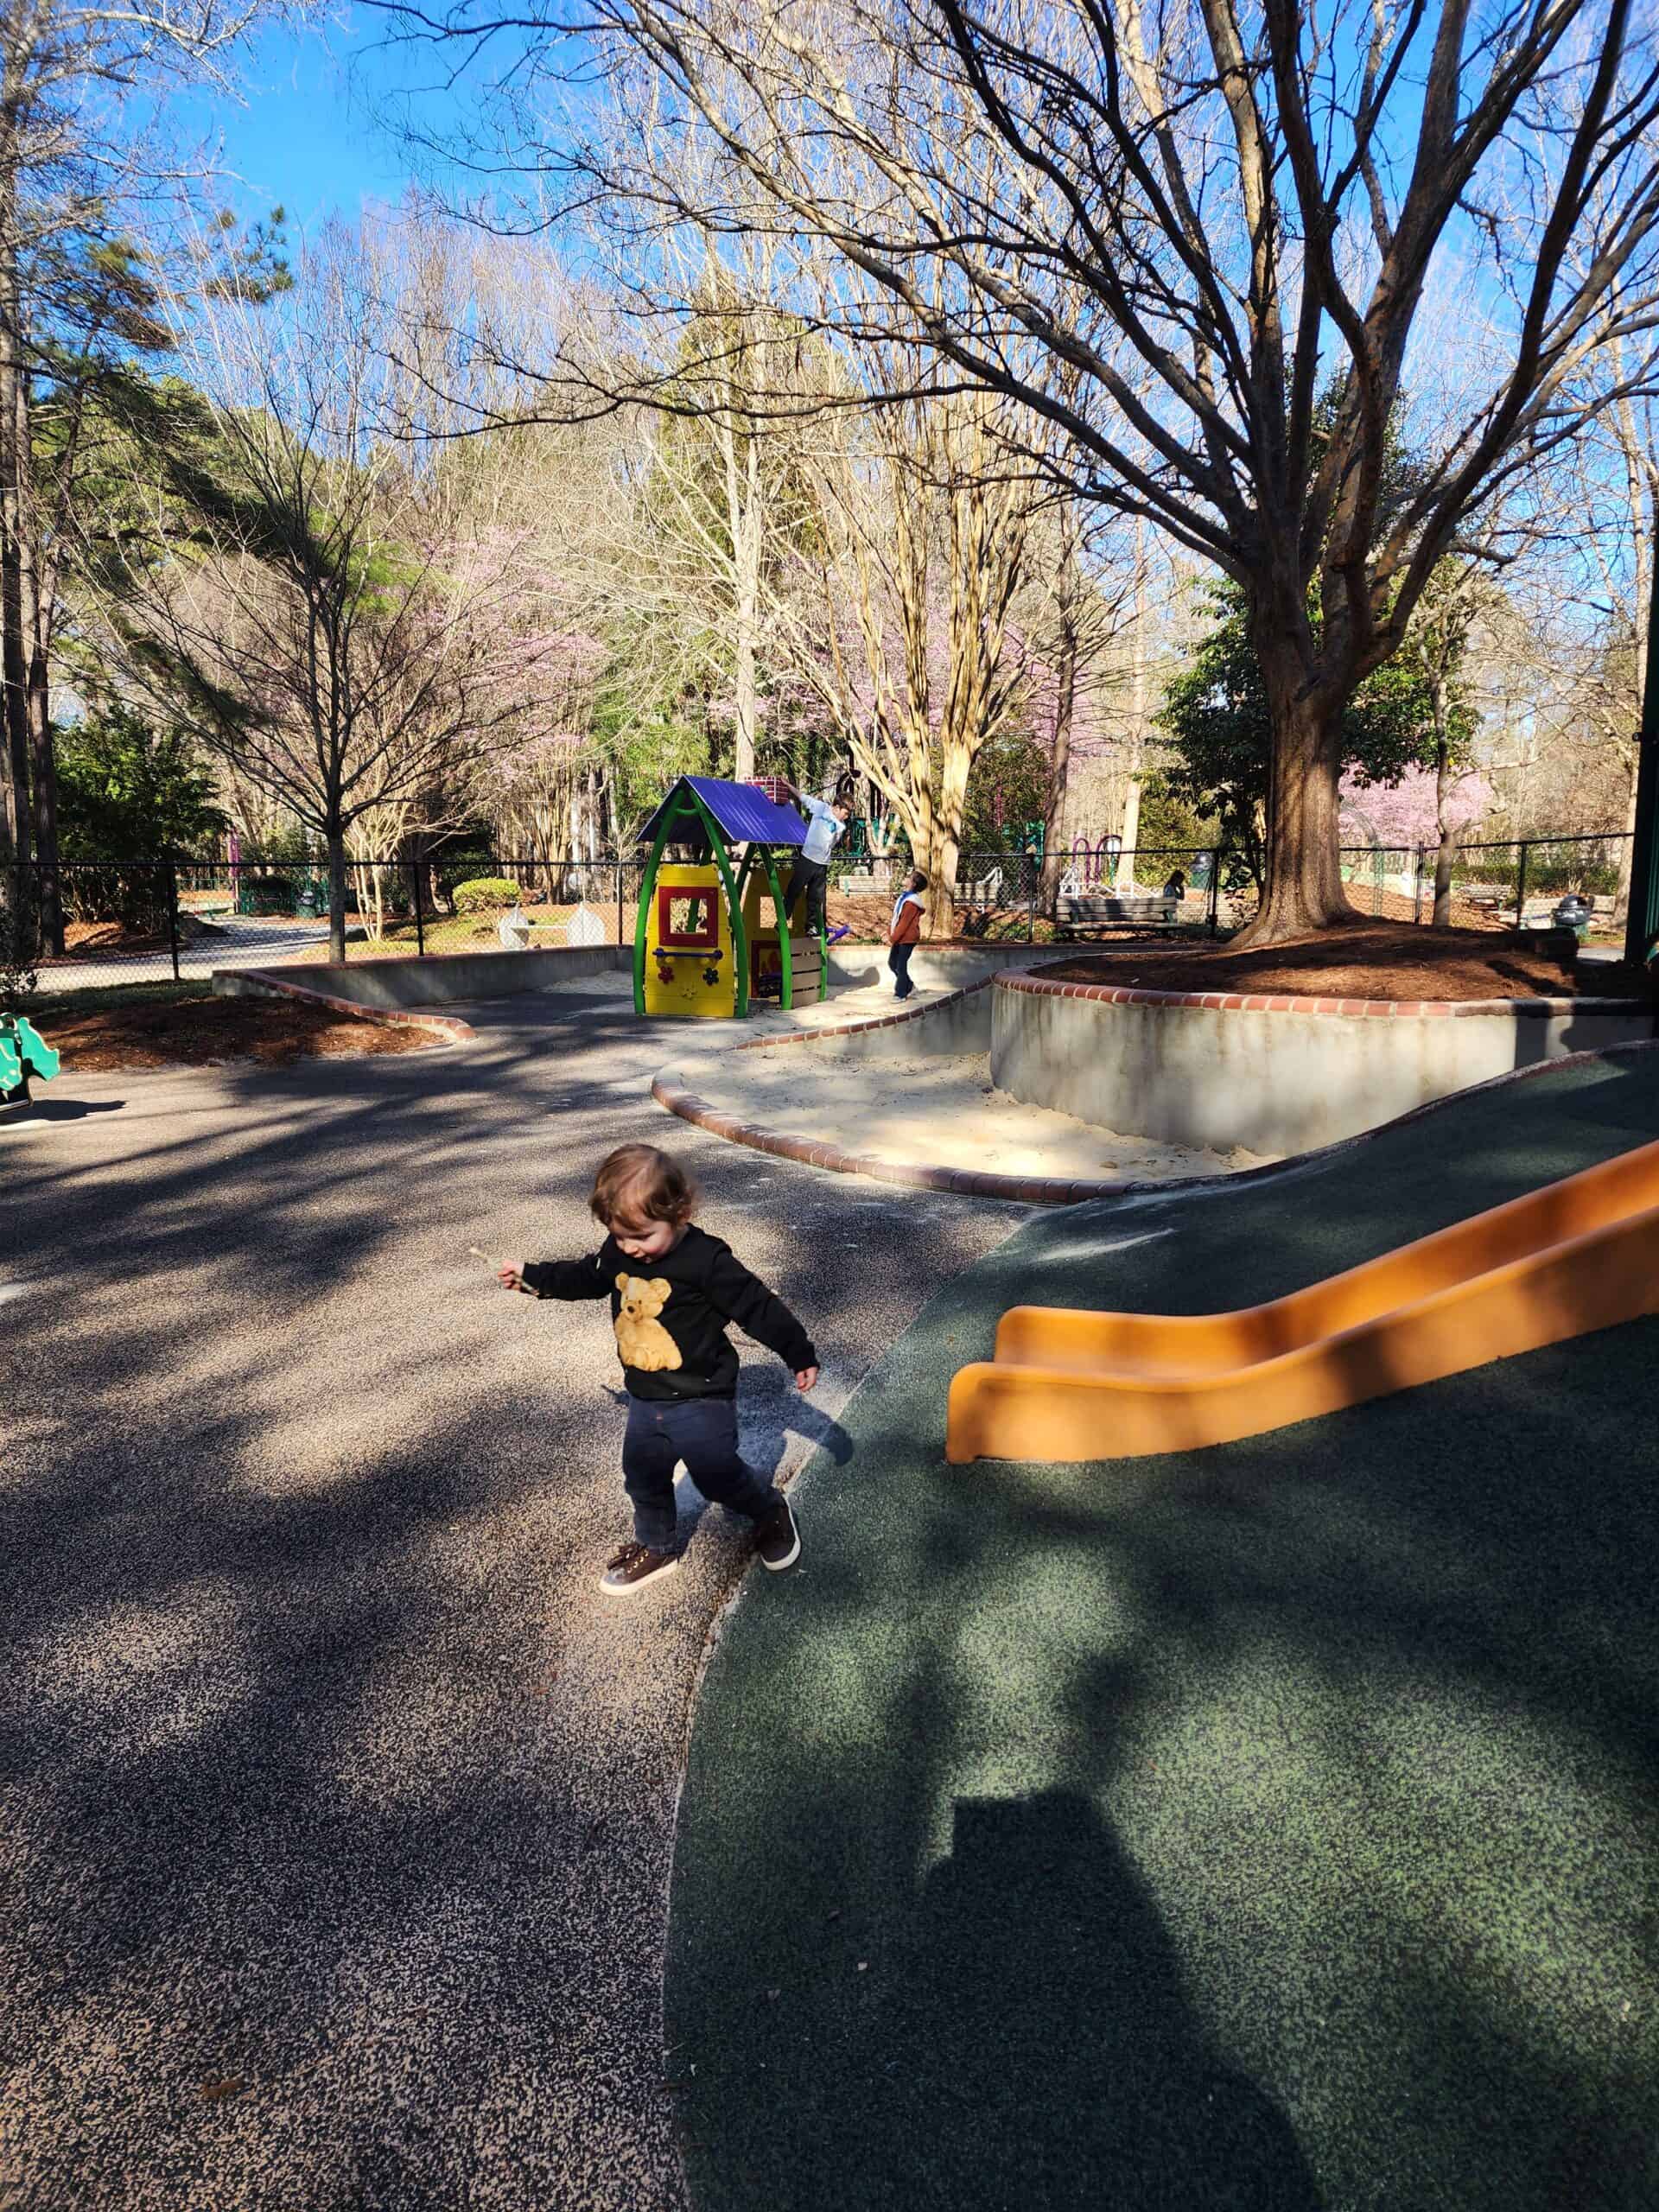 A young child runs joyfully on a shadow-dappled playground in Cary, NC, with spring blossoms visible on trees in the background, capturing a moment of carefree play